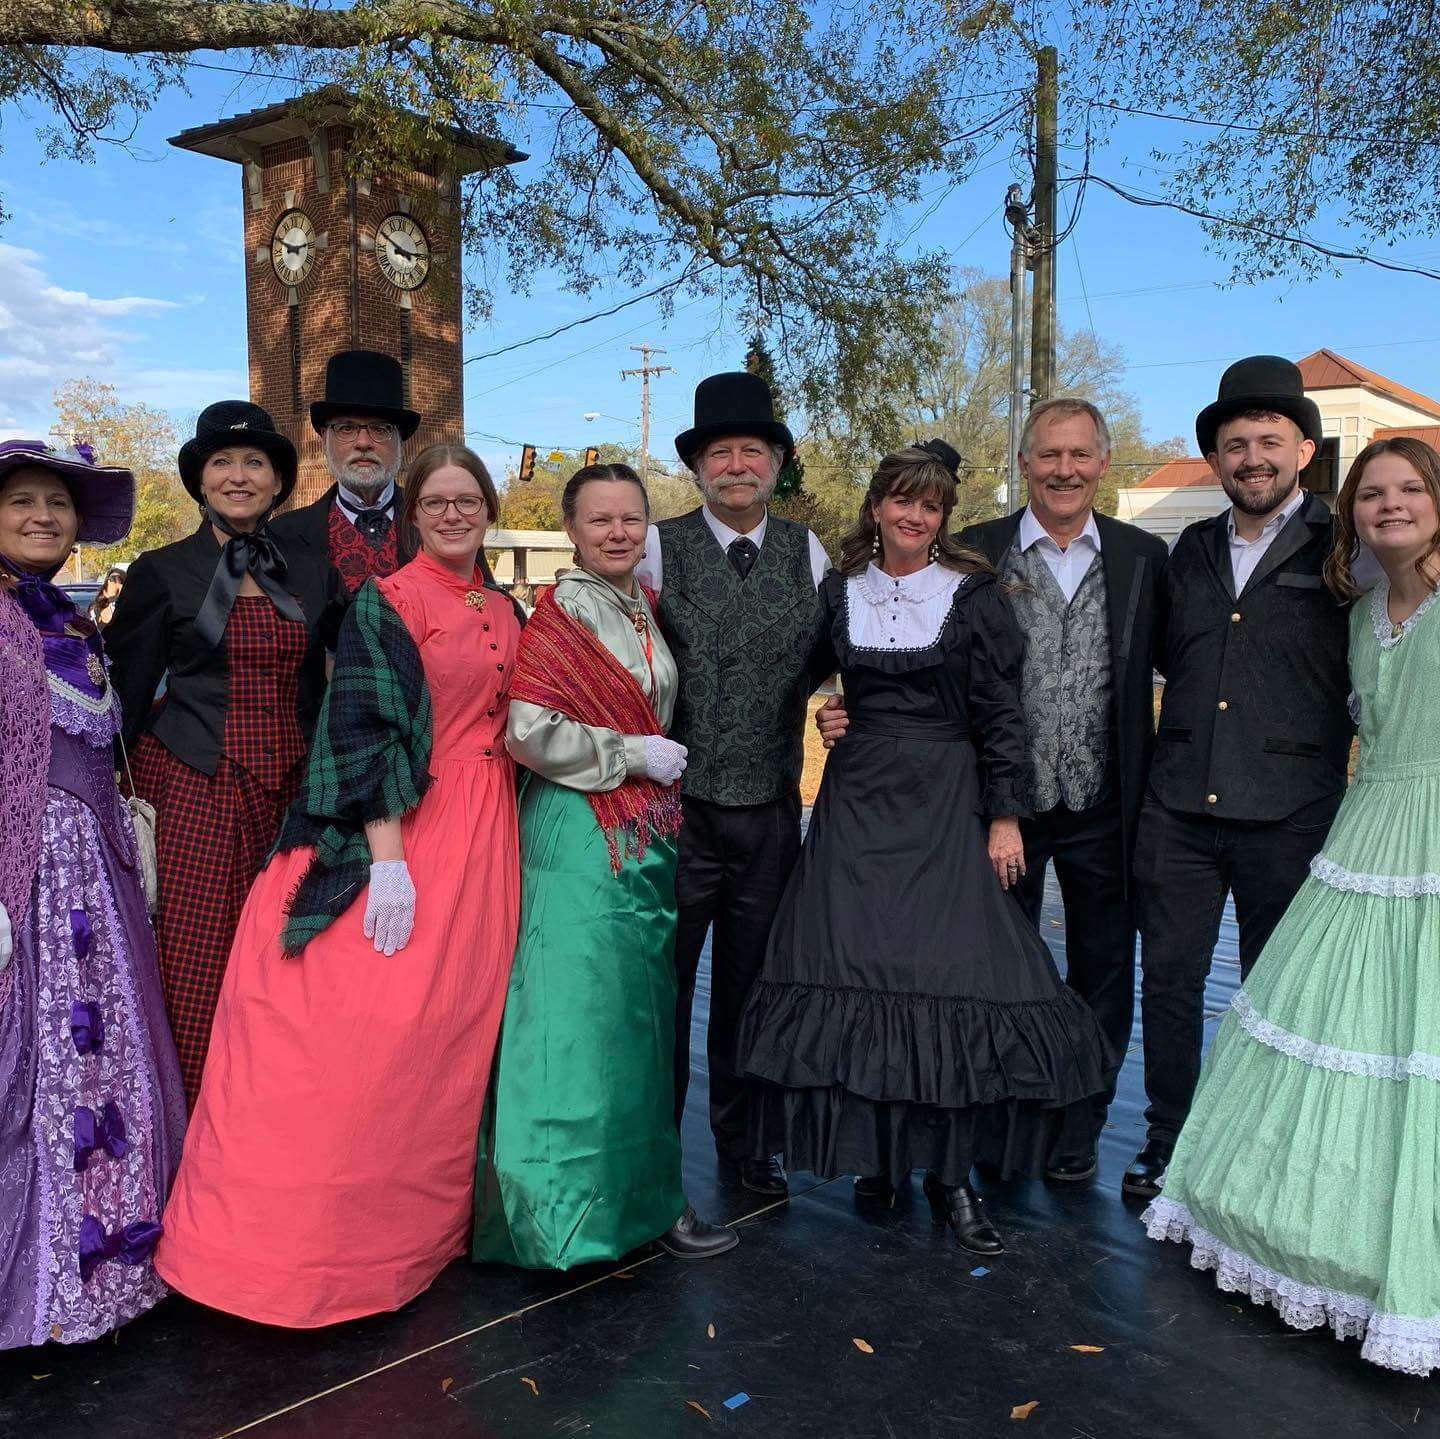 Hernando hosts a "Dickens" of a weekend holiday event